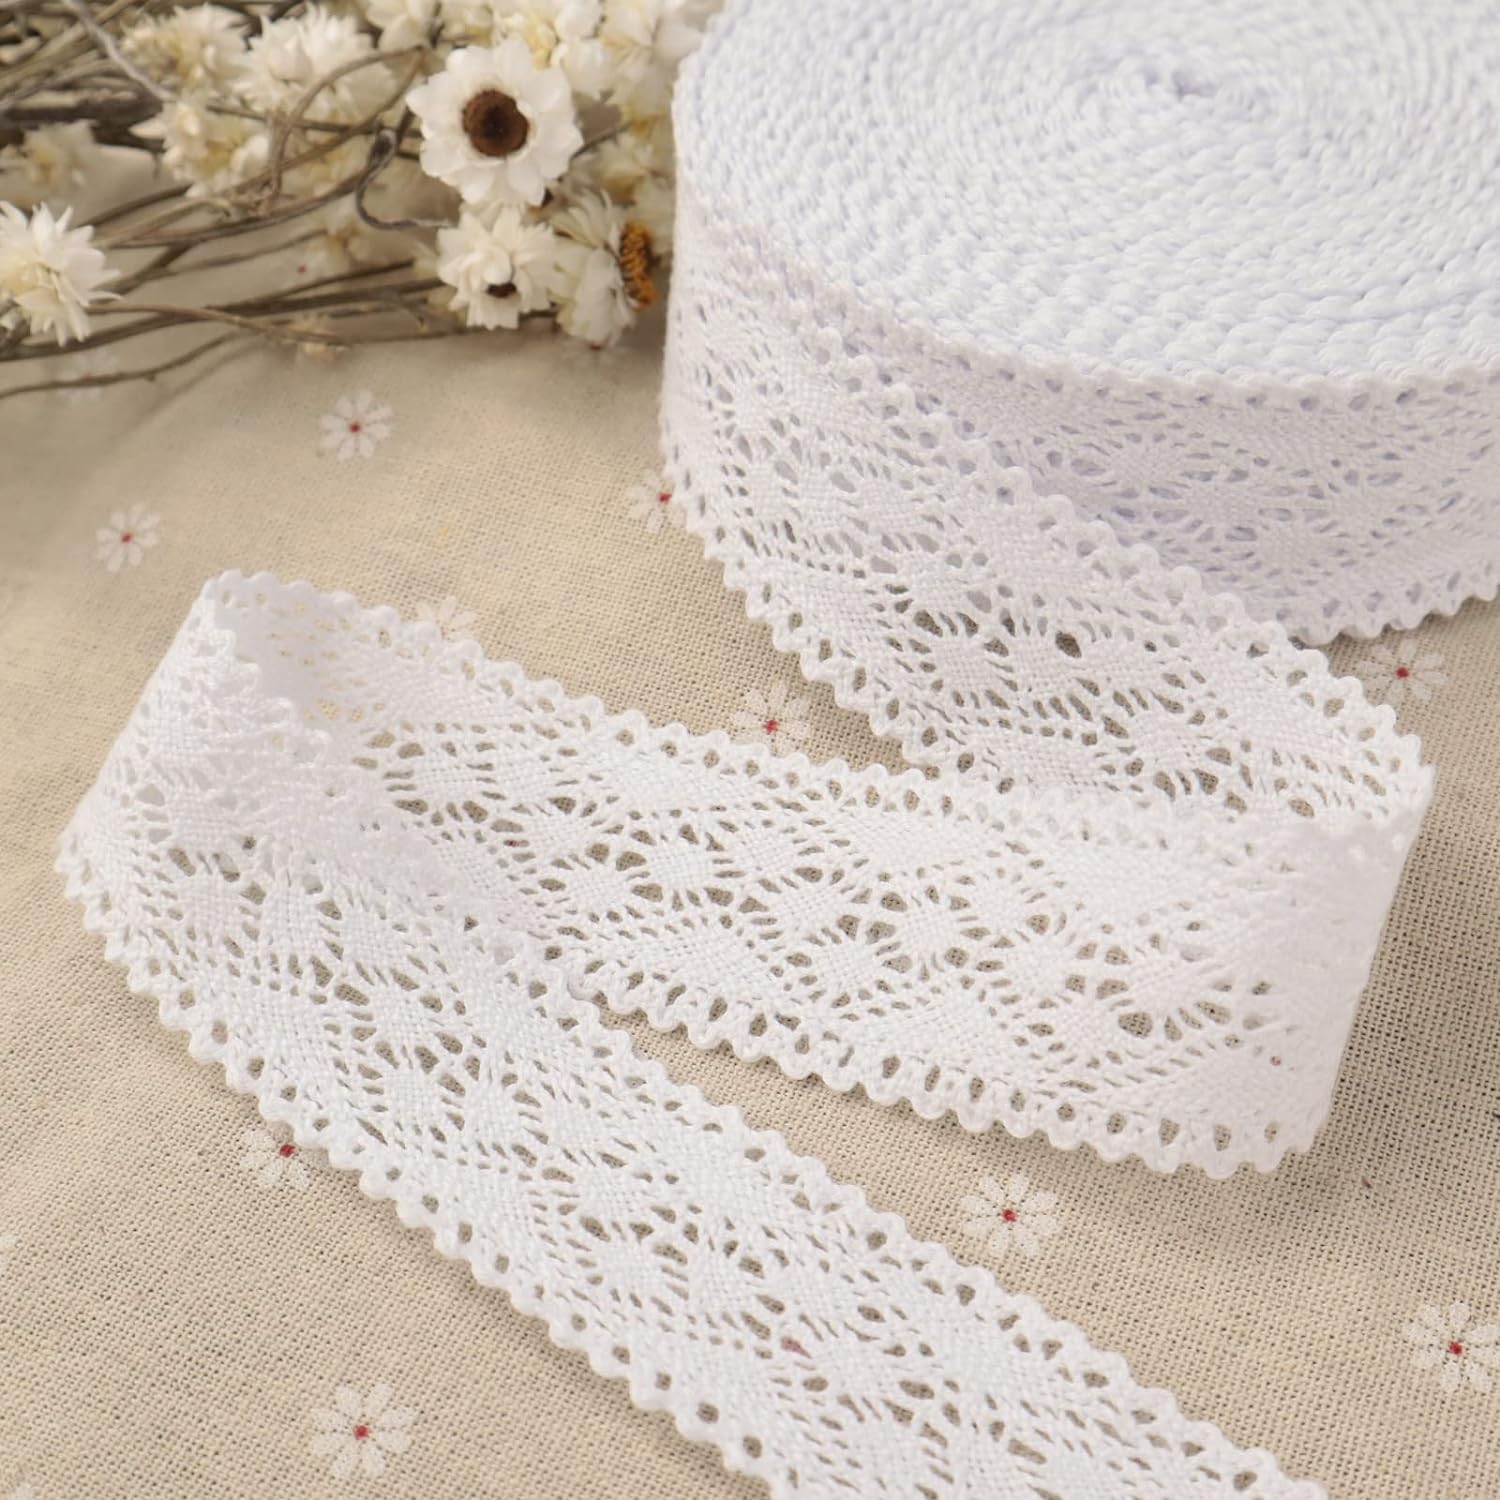 LEMO White Crochet Lace Trim Cotton Sewing Lace for Crafts, Gift Package Wrapping, Bridal Wedding Decoration, Scrapbooking Supplies